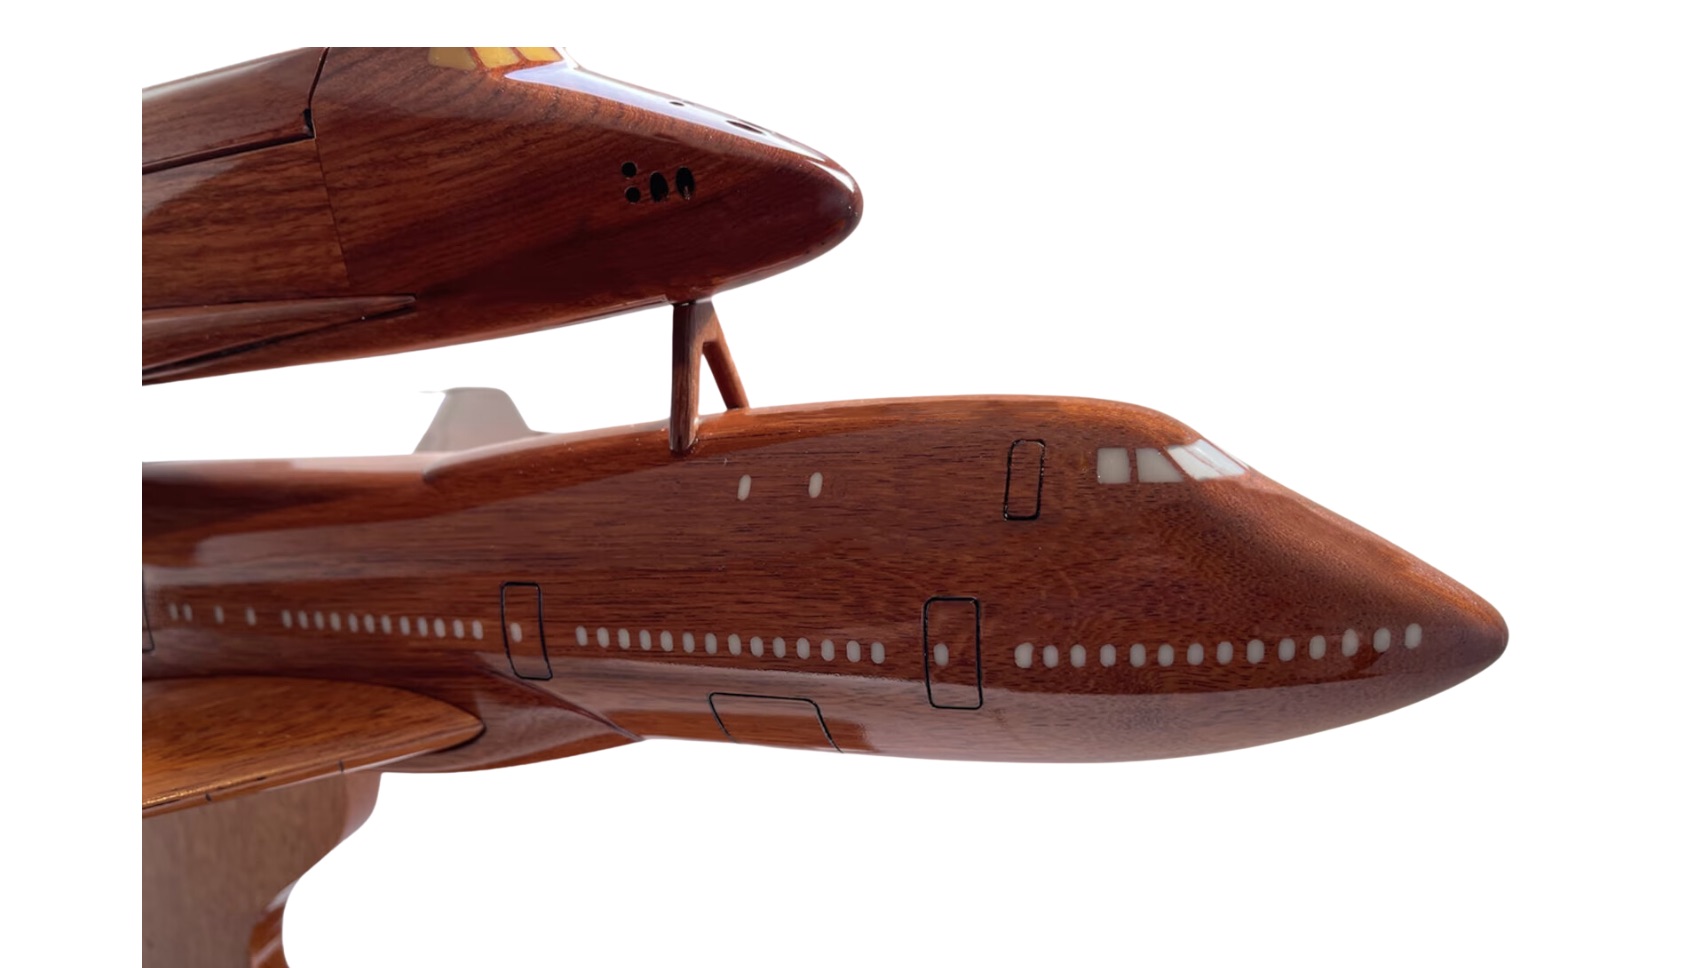 Boeing 747 with Space Shuttle Wooden Scale Model - Image 3 of 8